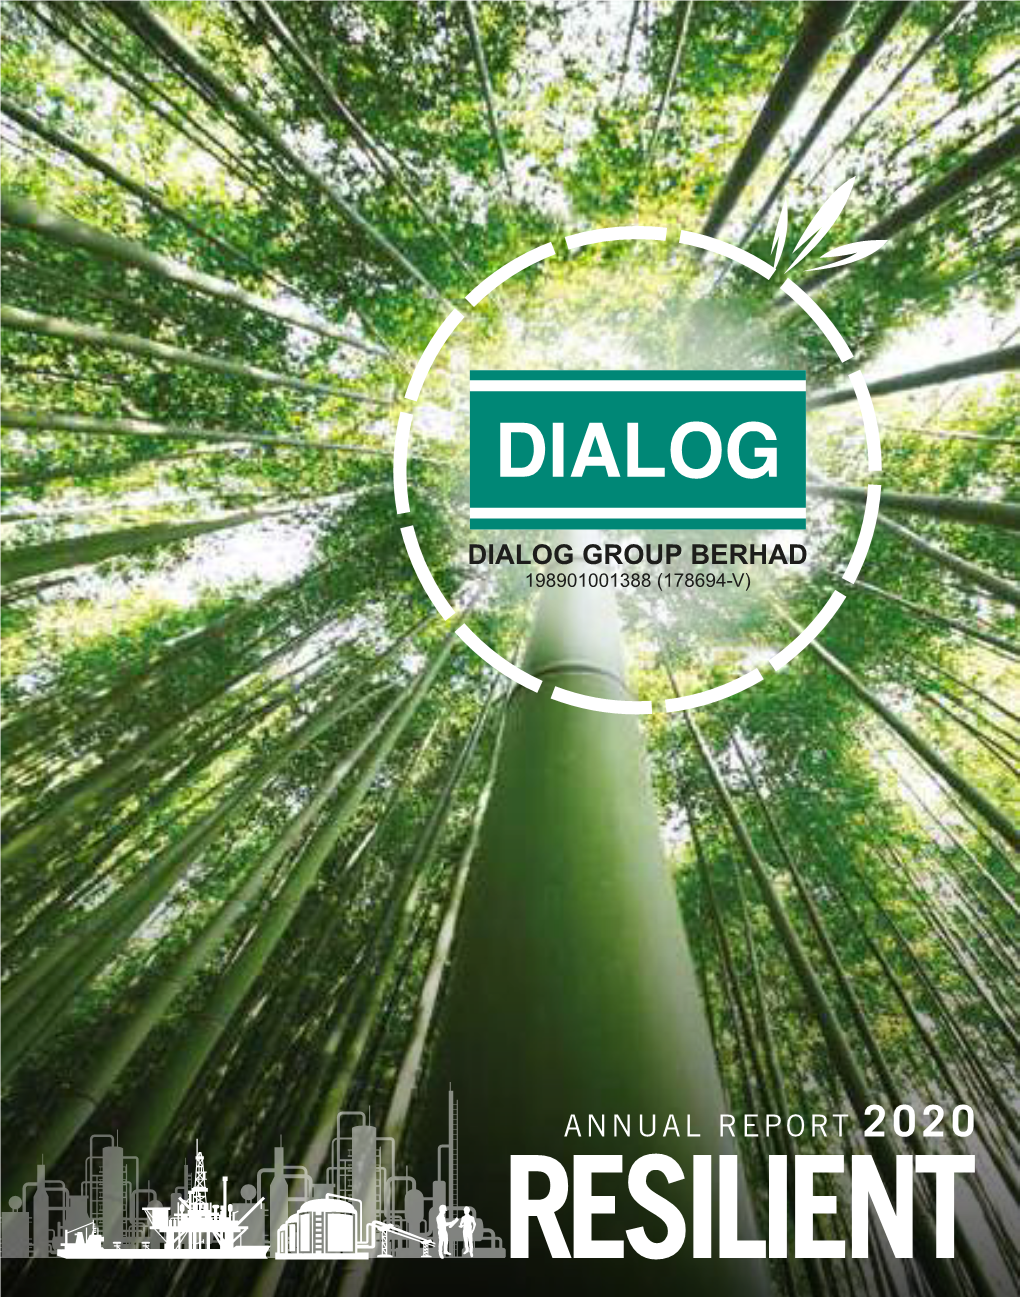 DIALOG Annual Report 2020 Part 1 (3.3Mb)